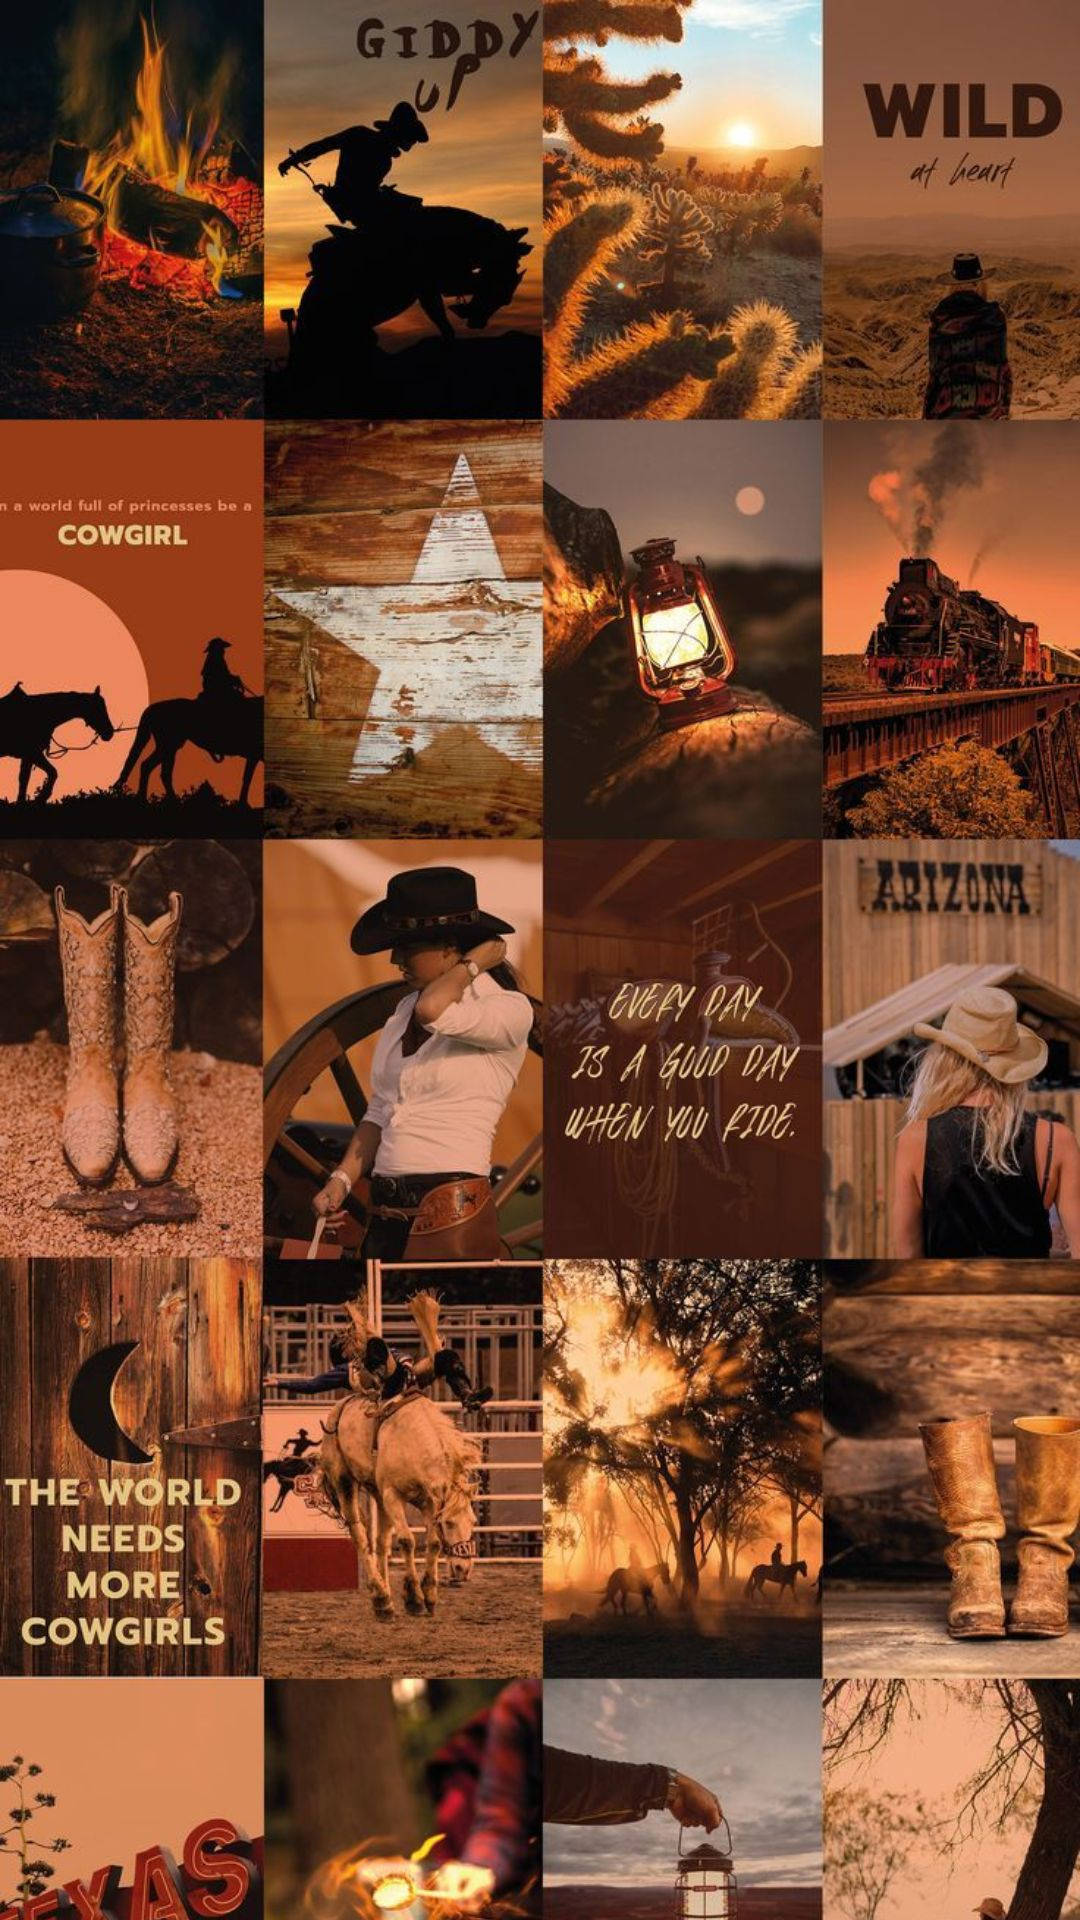 100+] Cowgirl Wallpapers